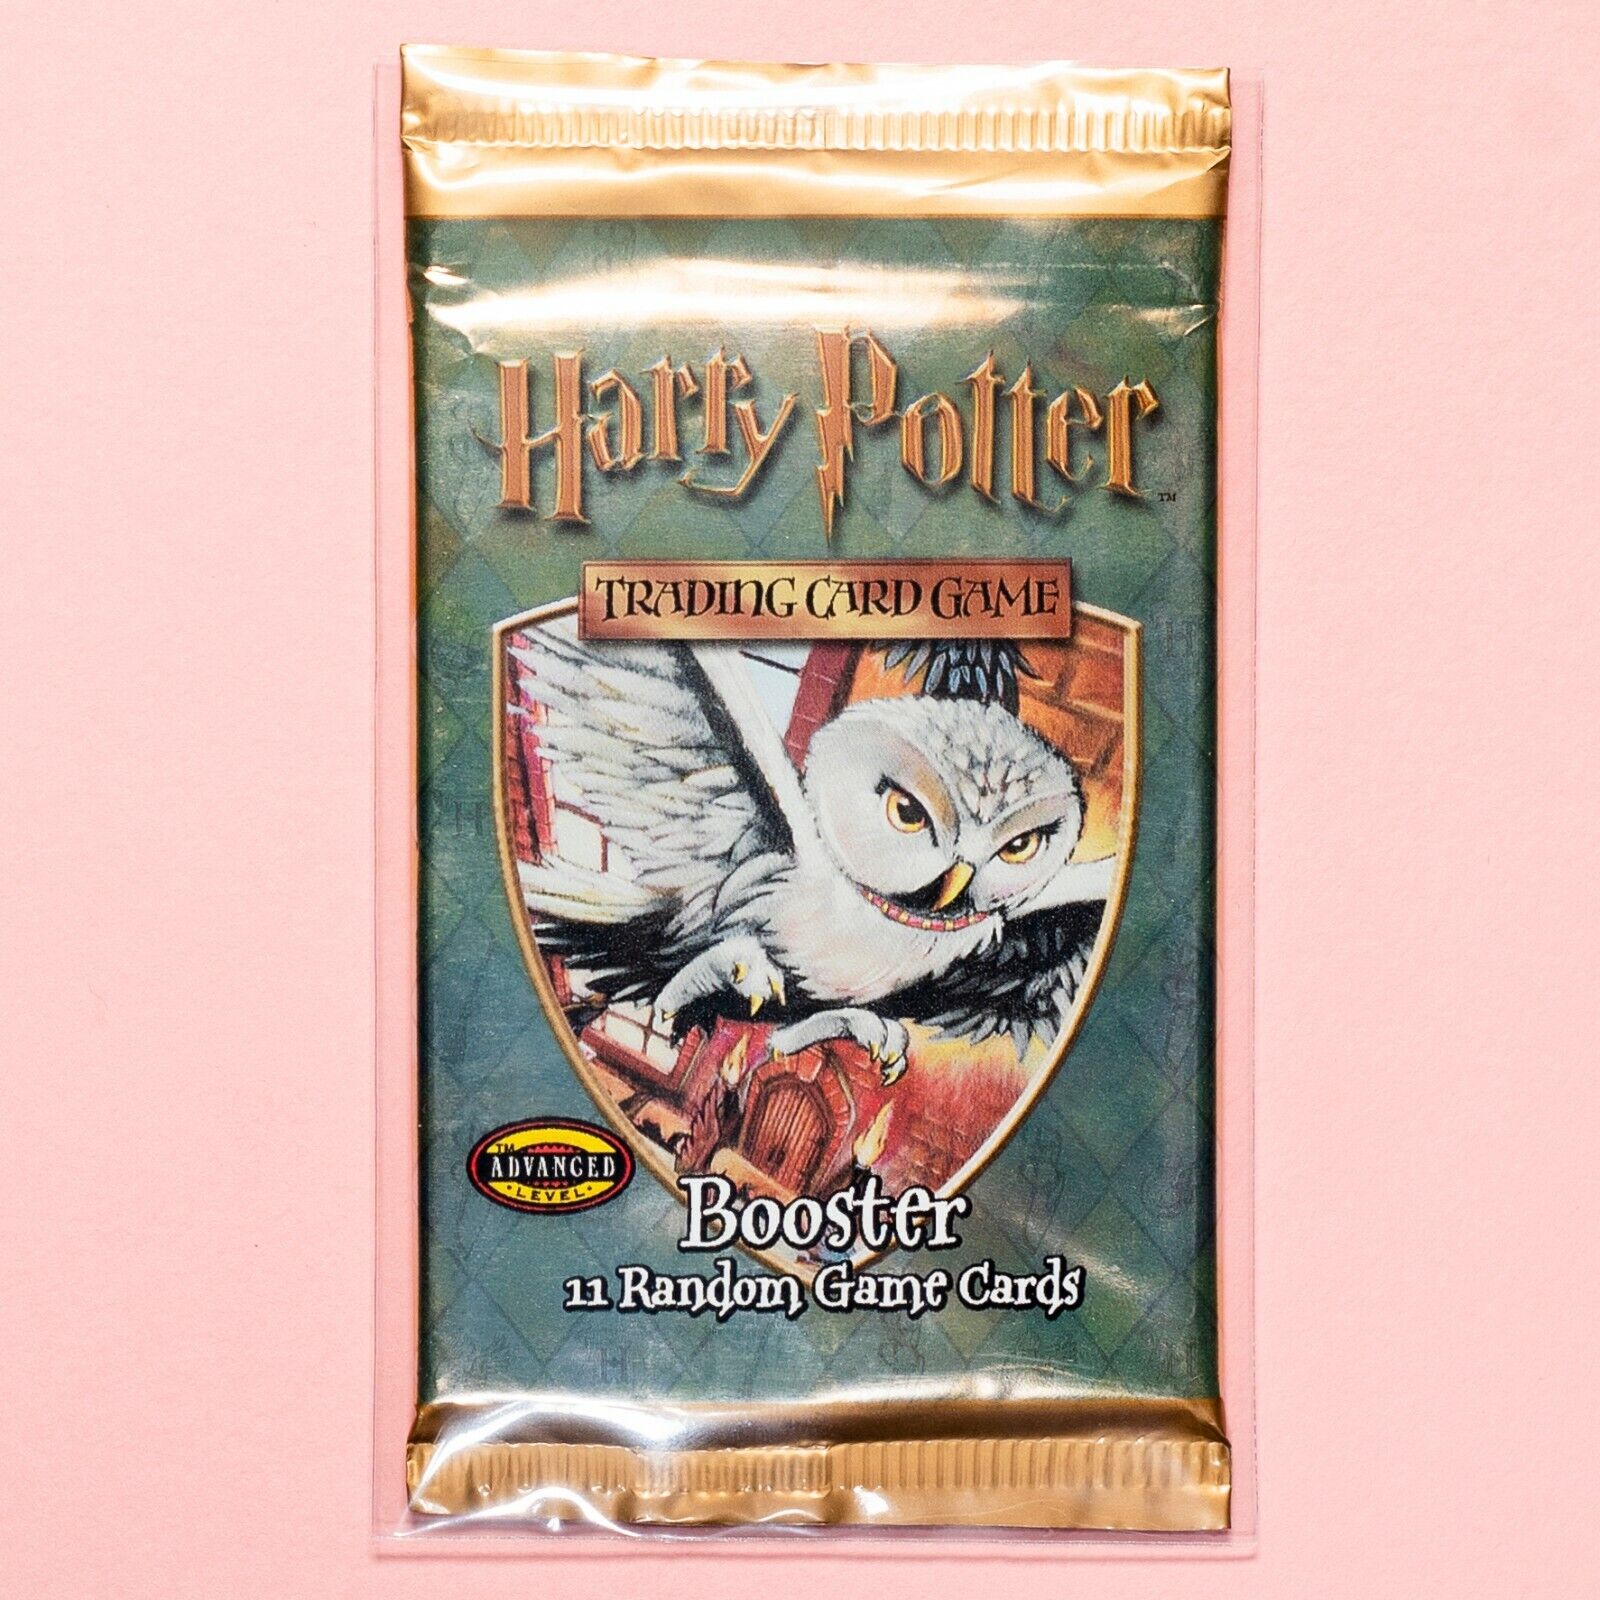 HARRY POTTER TRADING CARD GAME WOTC BASE SET SEALED BOOSTER PACK 